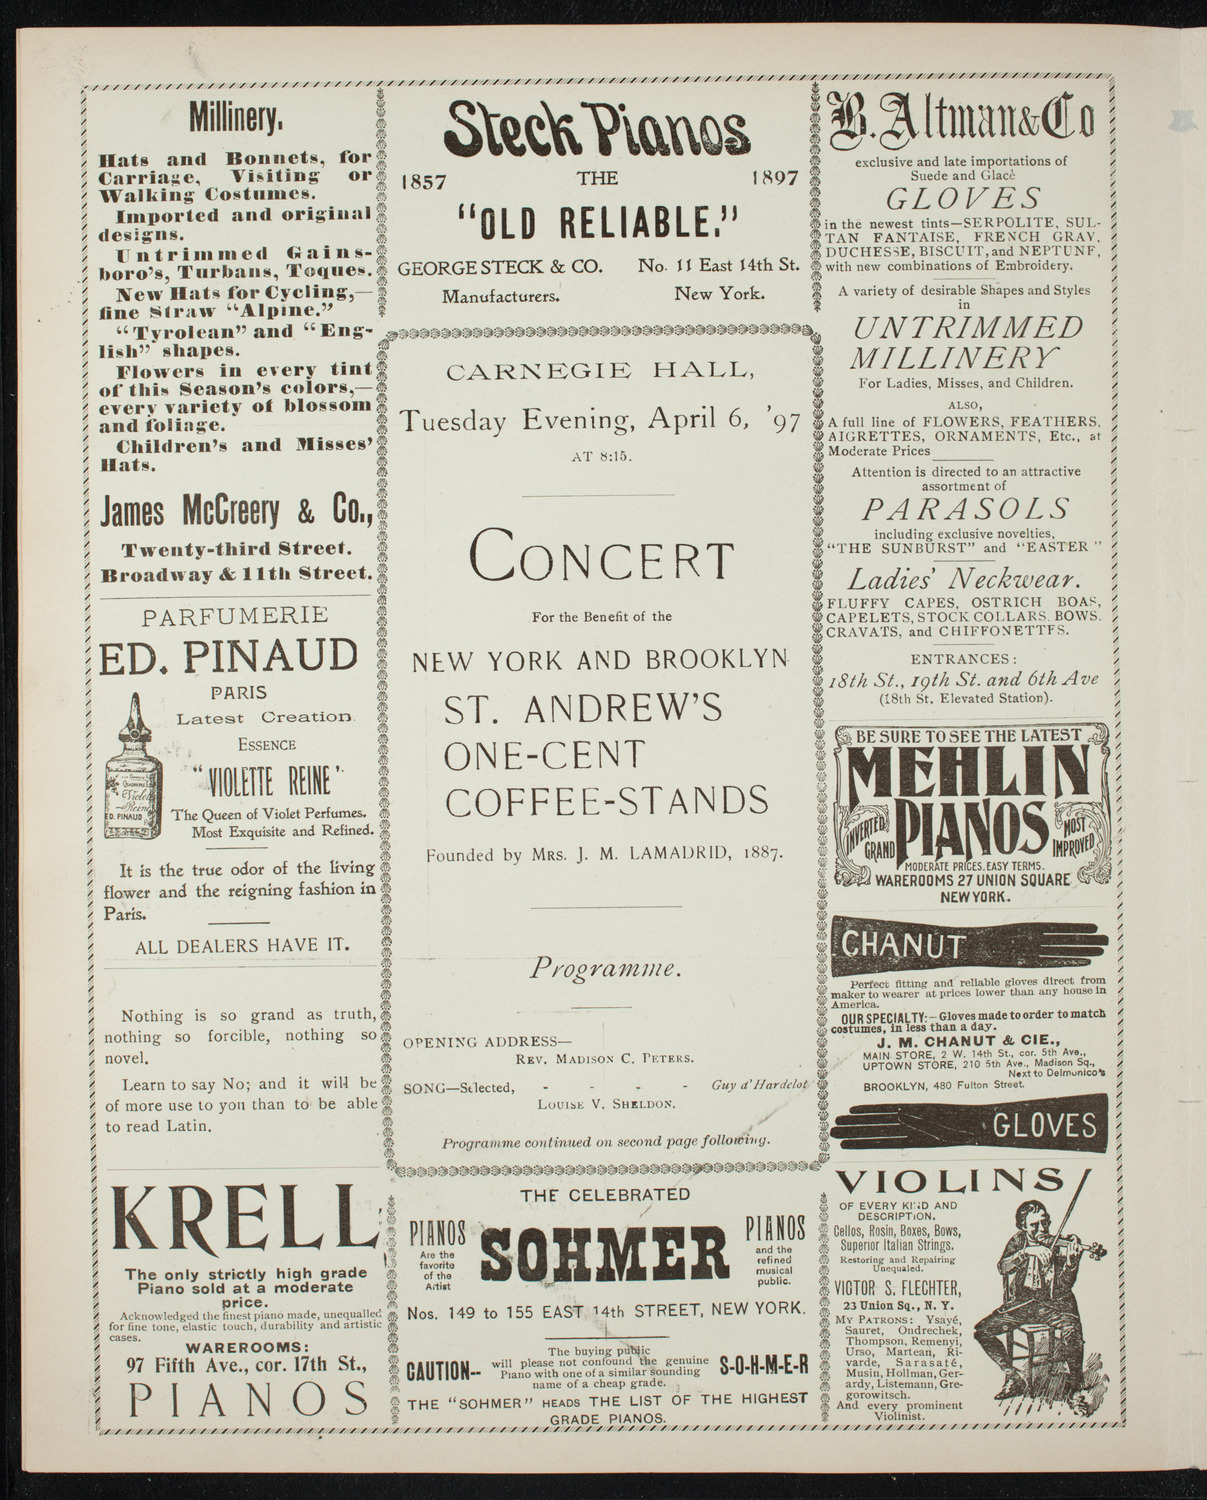 Benefit: New York and Brooklyn St. Andrew's One-Cent Coffee-Stands, April 6, 1897, program page 4